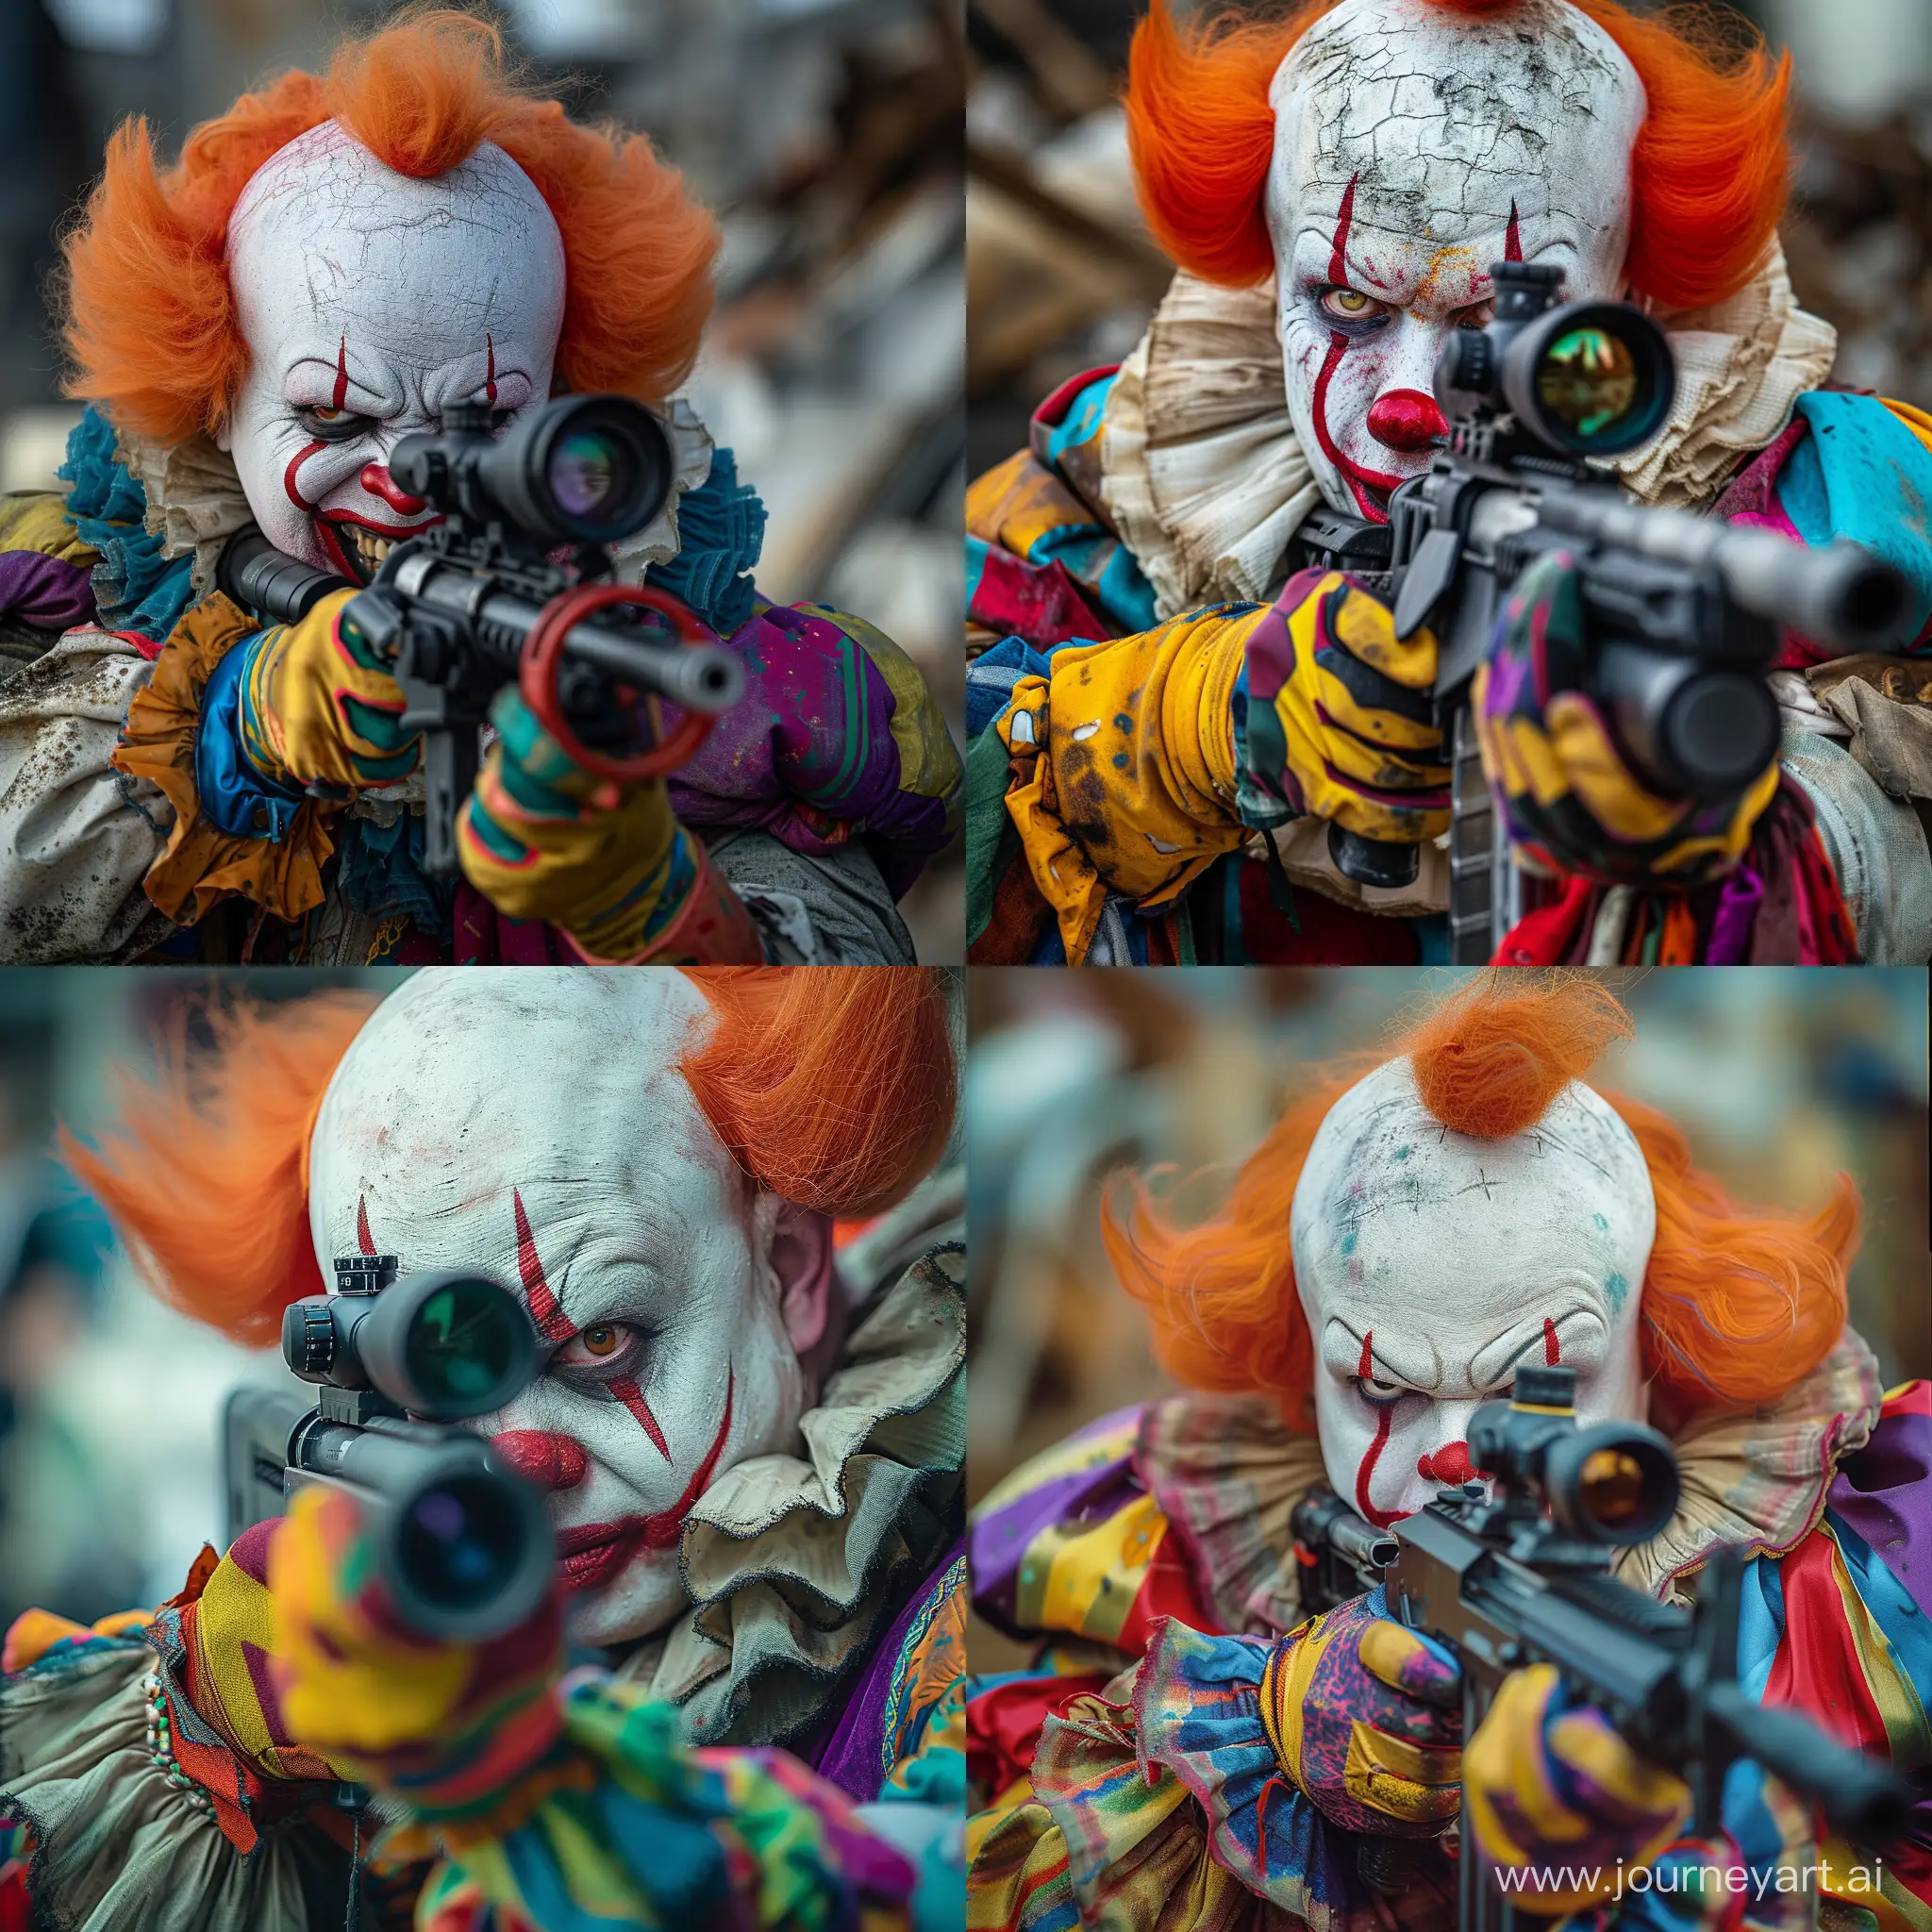 close-up of a person dressed as a clown holding what appears to be a firearm with an attached scope. The clown makeup features exaggerated red lips, a white face, and a balding head with tufts of orange hair on either side. He wears colorful costumes and gloves. The expression on the clown's face is menacing, blended with a hint of madness, which is in stark contrast to the typically joyful and humorous association with clowns. The setting seems to be chaotic, with a blurred background that gives the impression of a disordered or post-apocalyptic environment.